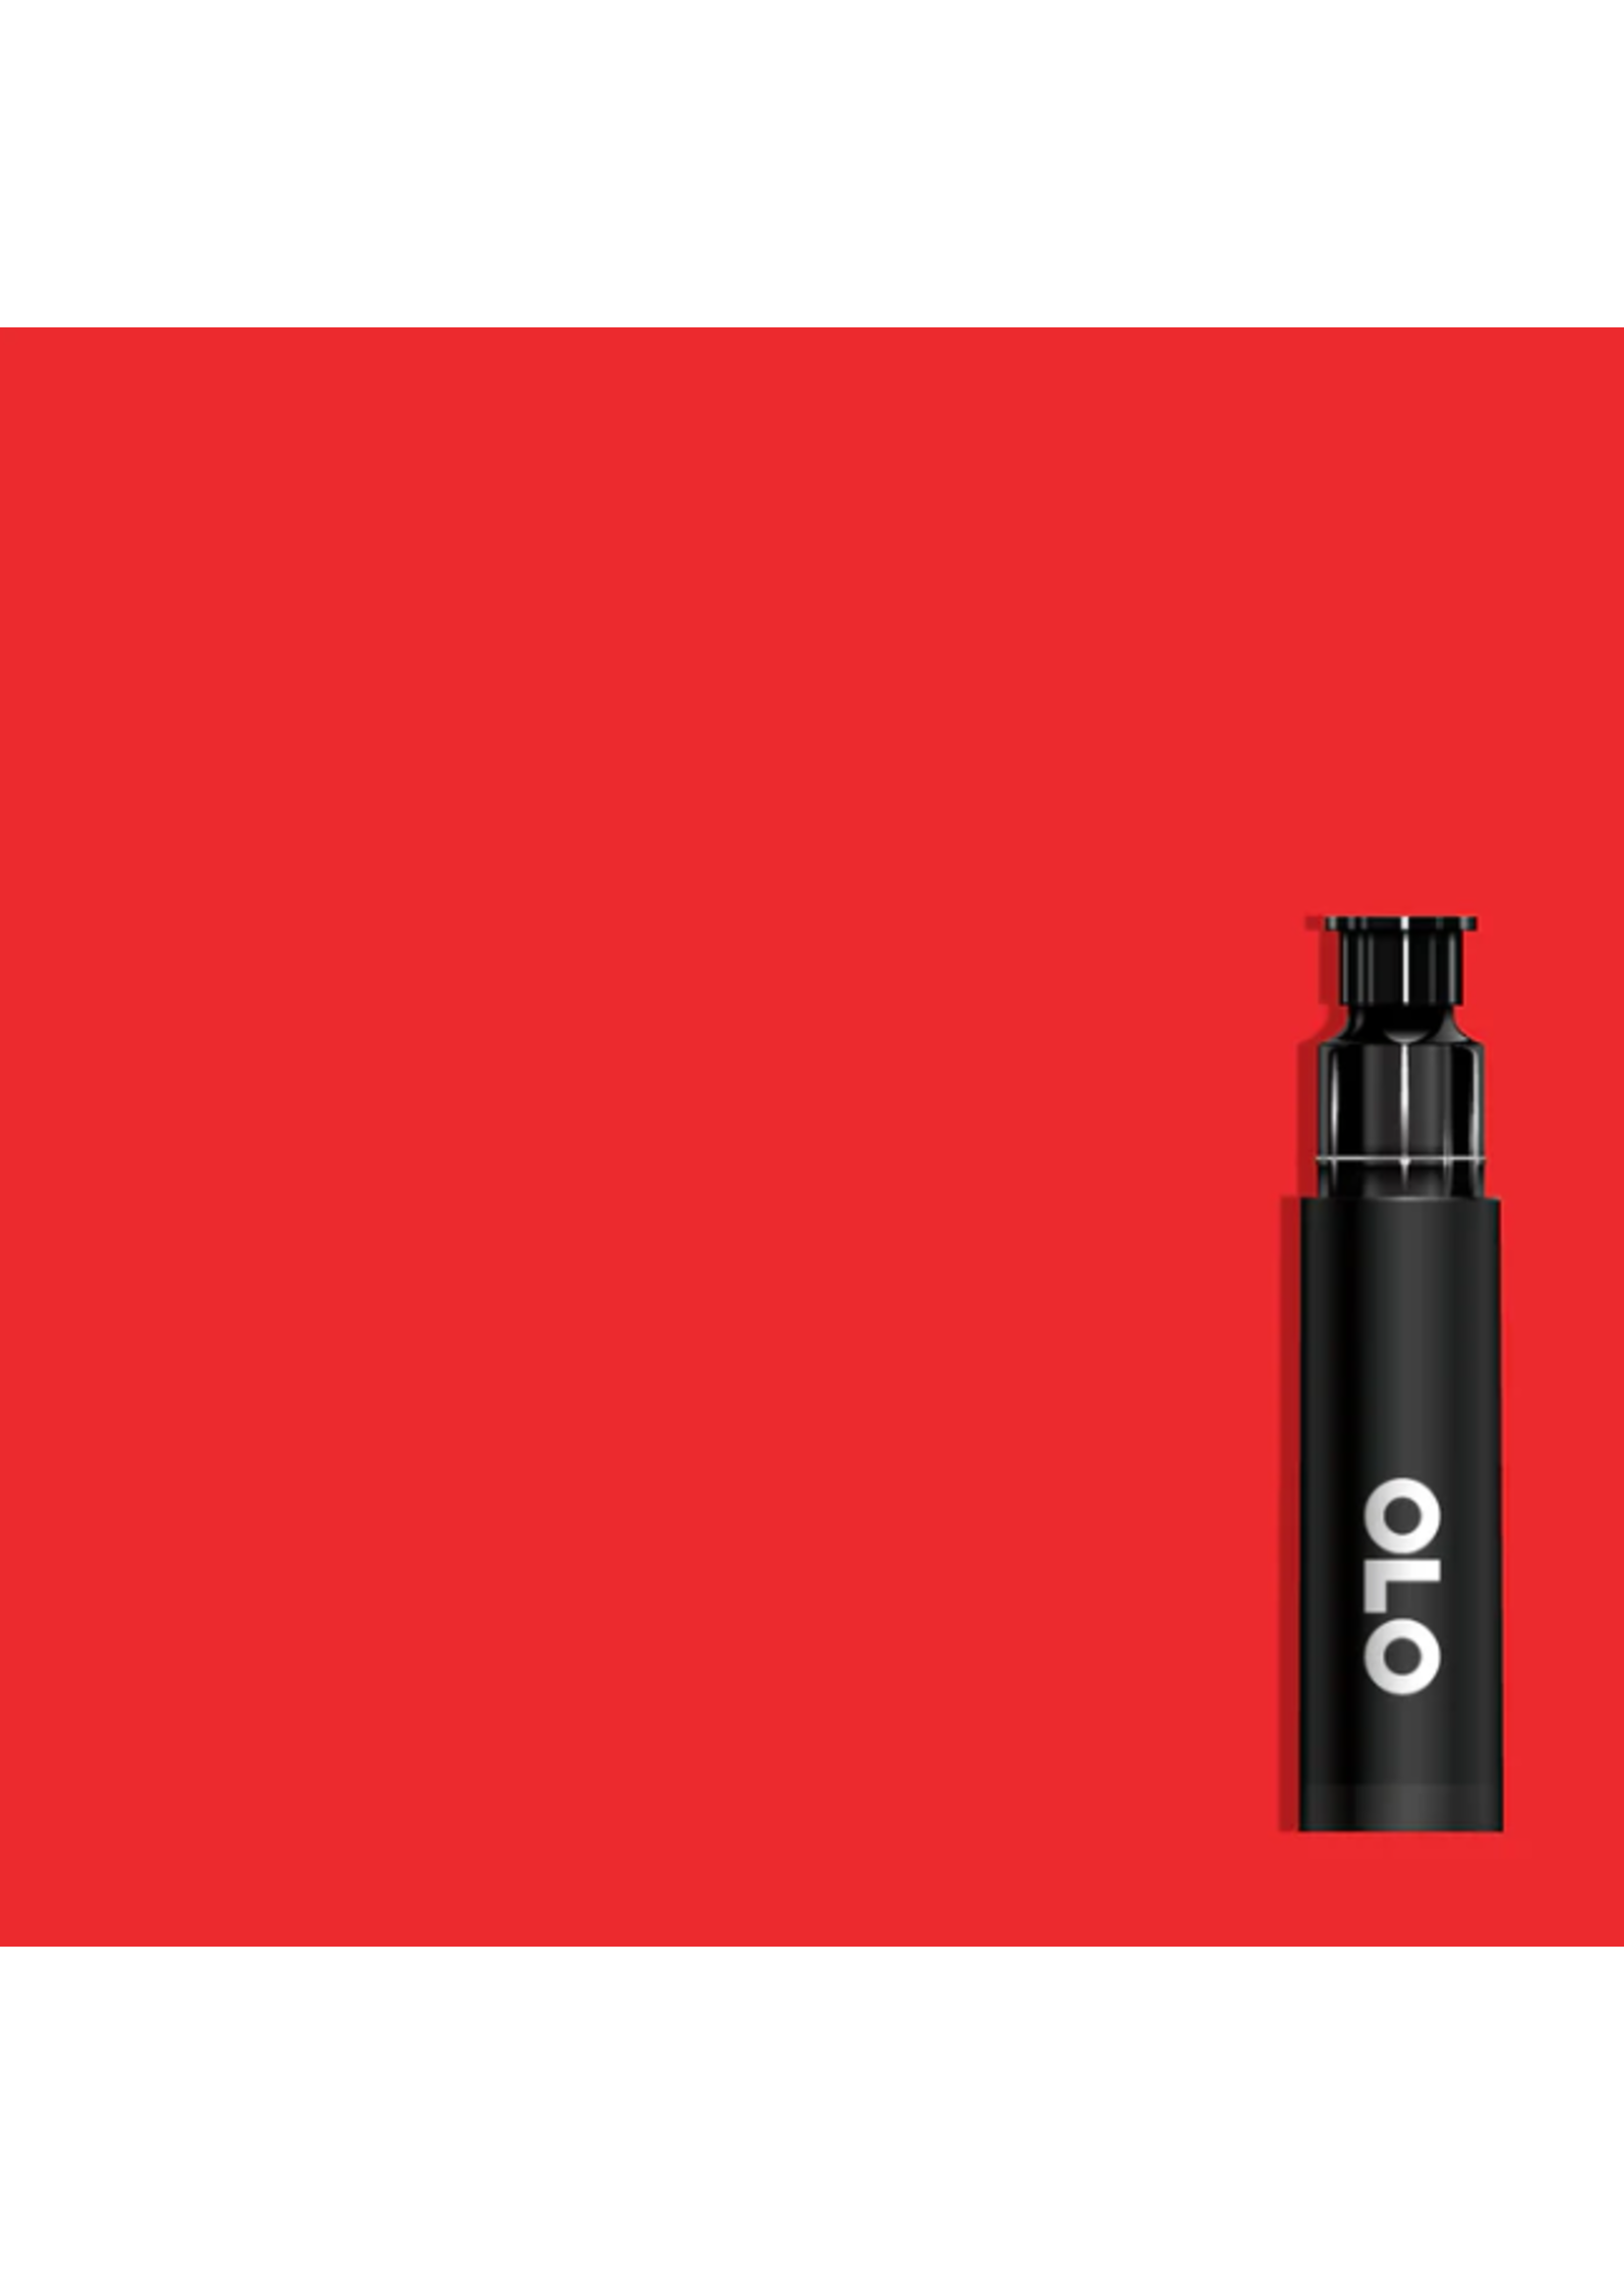 OLO OLO Brush Replacement Cartridge: Red Grapefruit